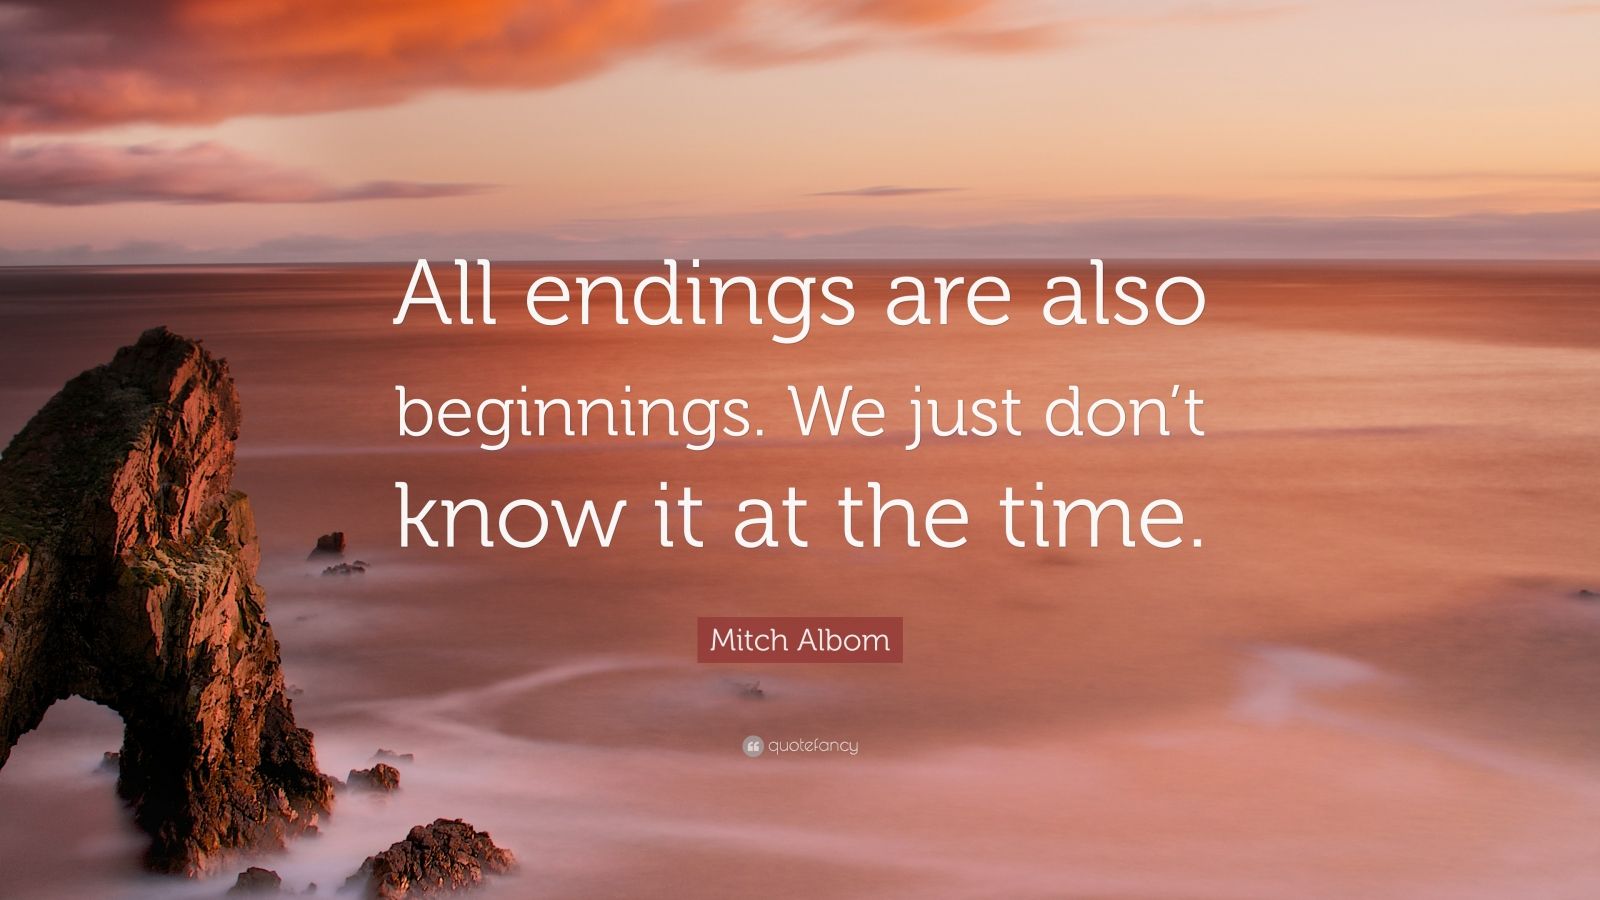 quotes about endings being beginnings